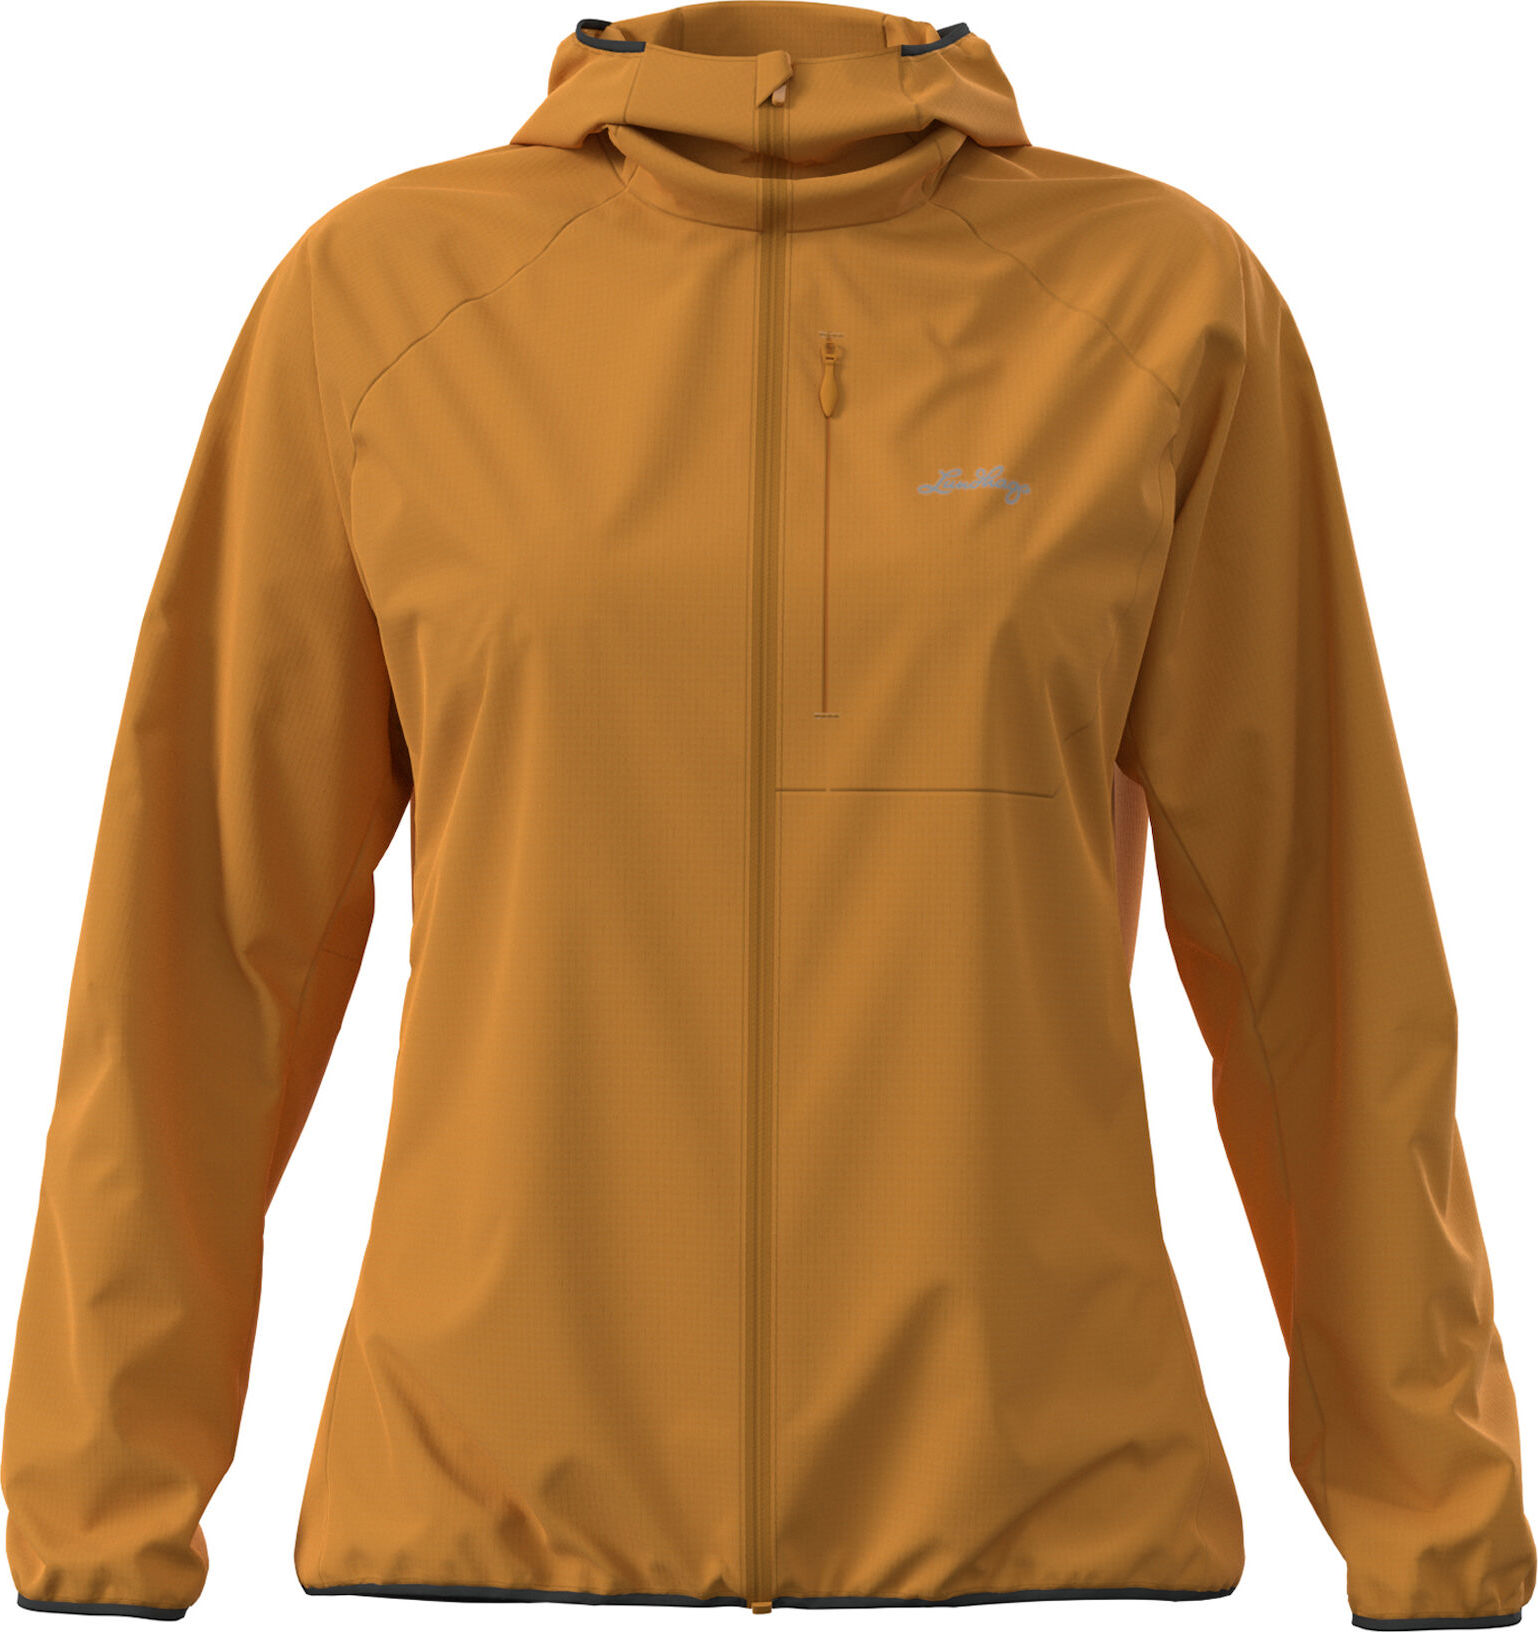 Lundhags Women’s Tived Light Wind Jacket Gold